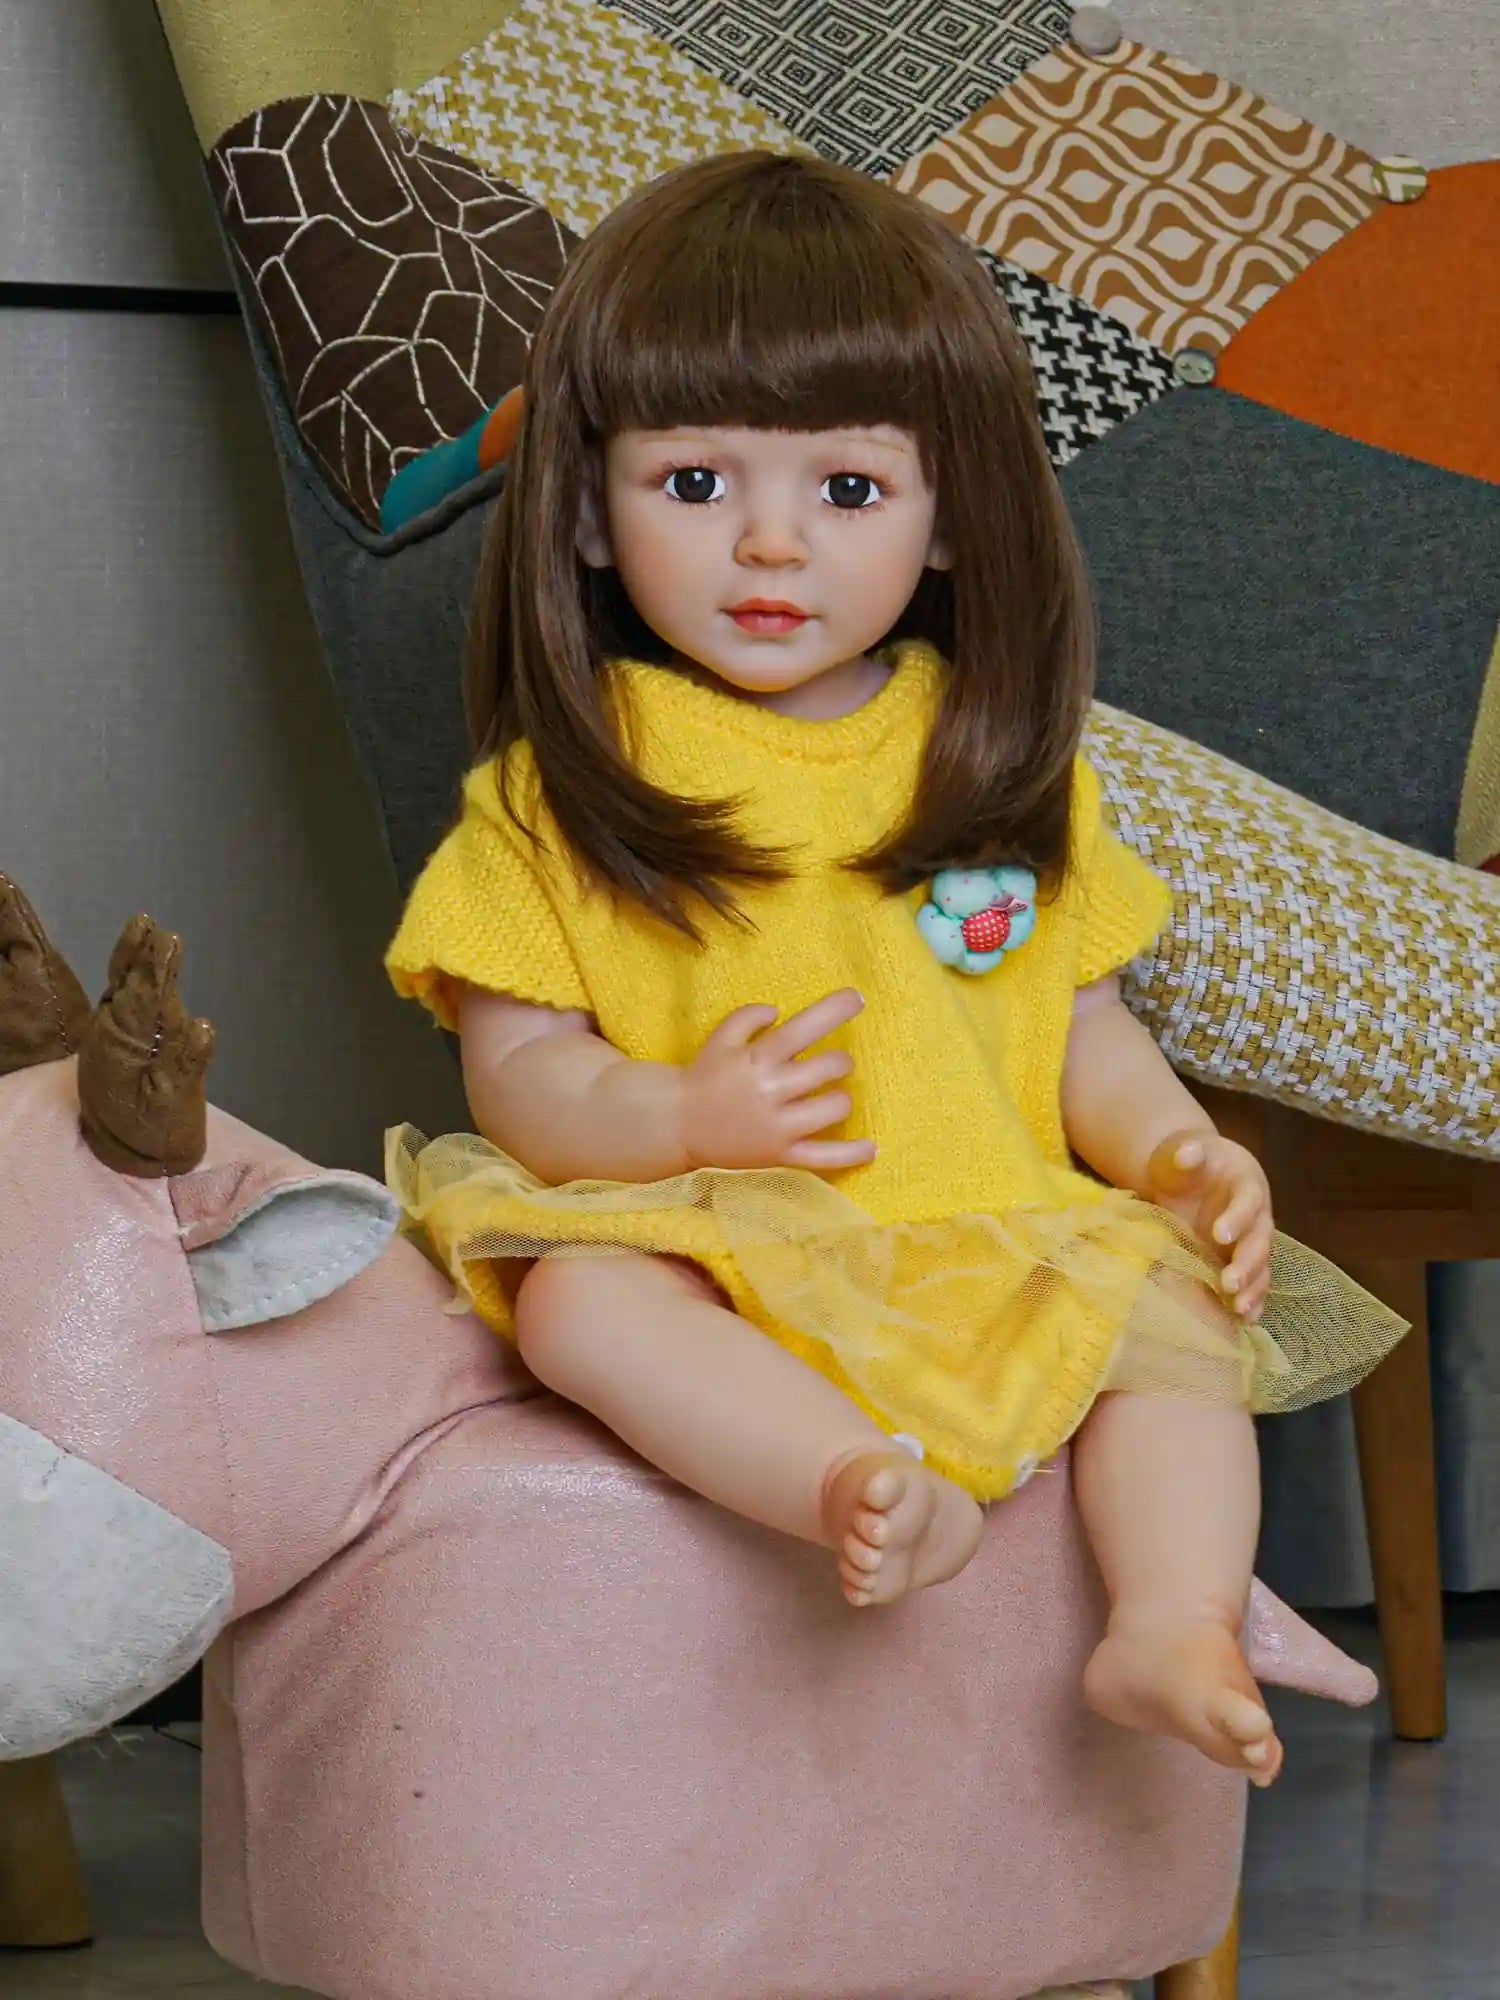 Realistic doll with a thoughtful gaze, clad in a cheerful yellow dress with a textured top and sheer overlay skirt, sitting against a modern geometric-patterned cushion.